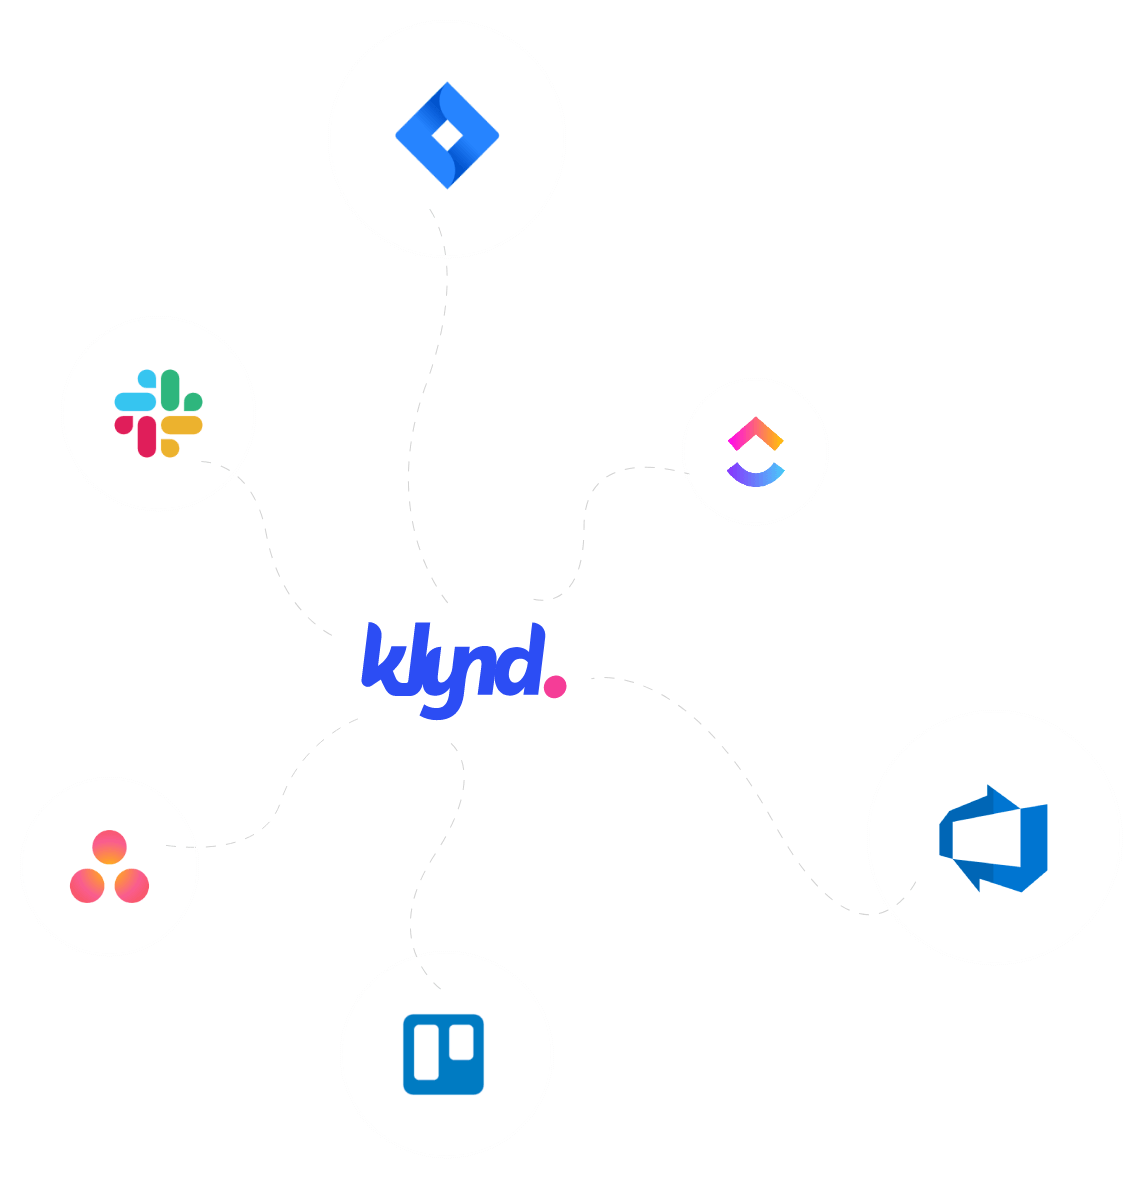 klynd seamlessly integrates with popular tools like Jira, TFS, Slack, Trello, ClickUp, and Asana for streamlined customer feedback and bug tracking